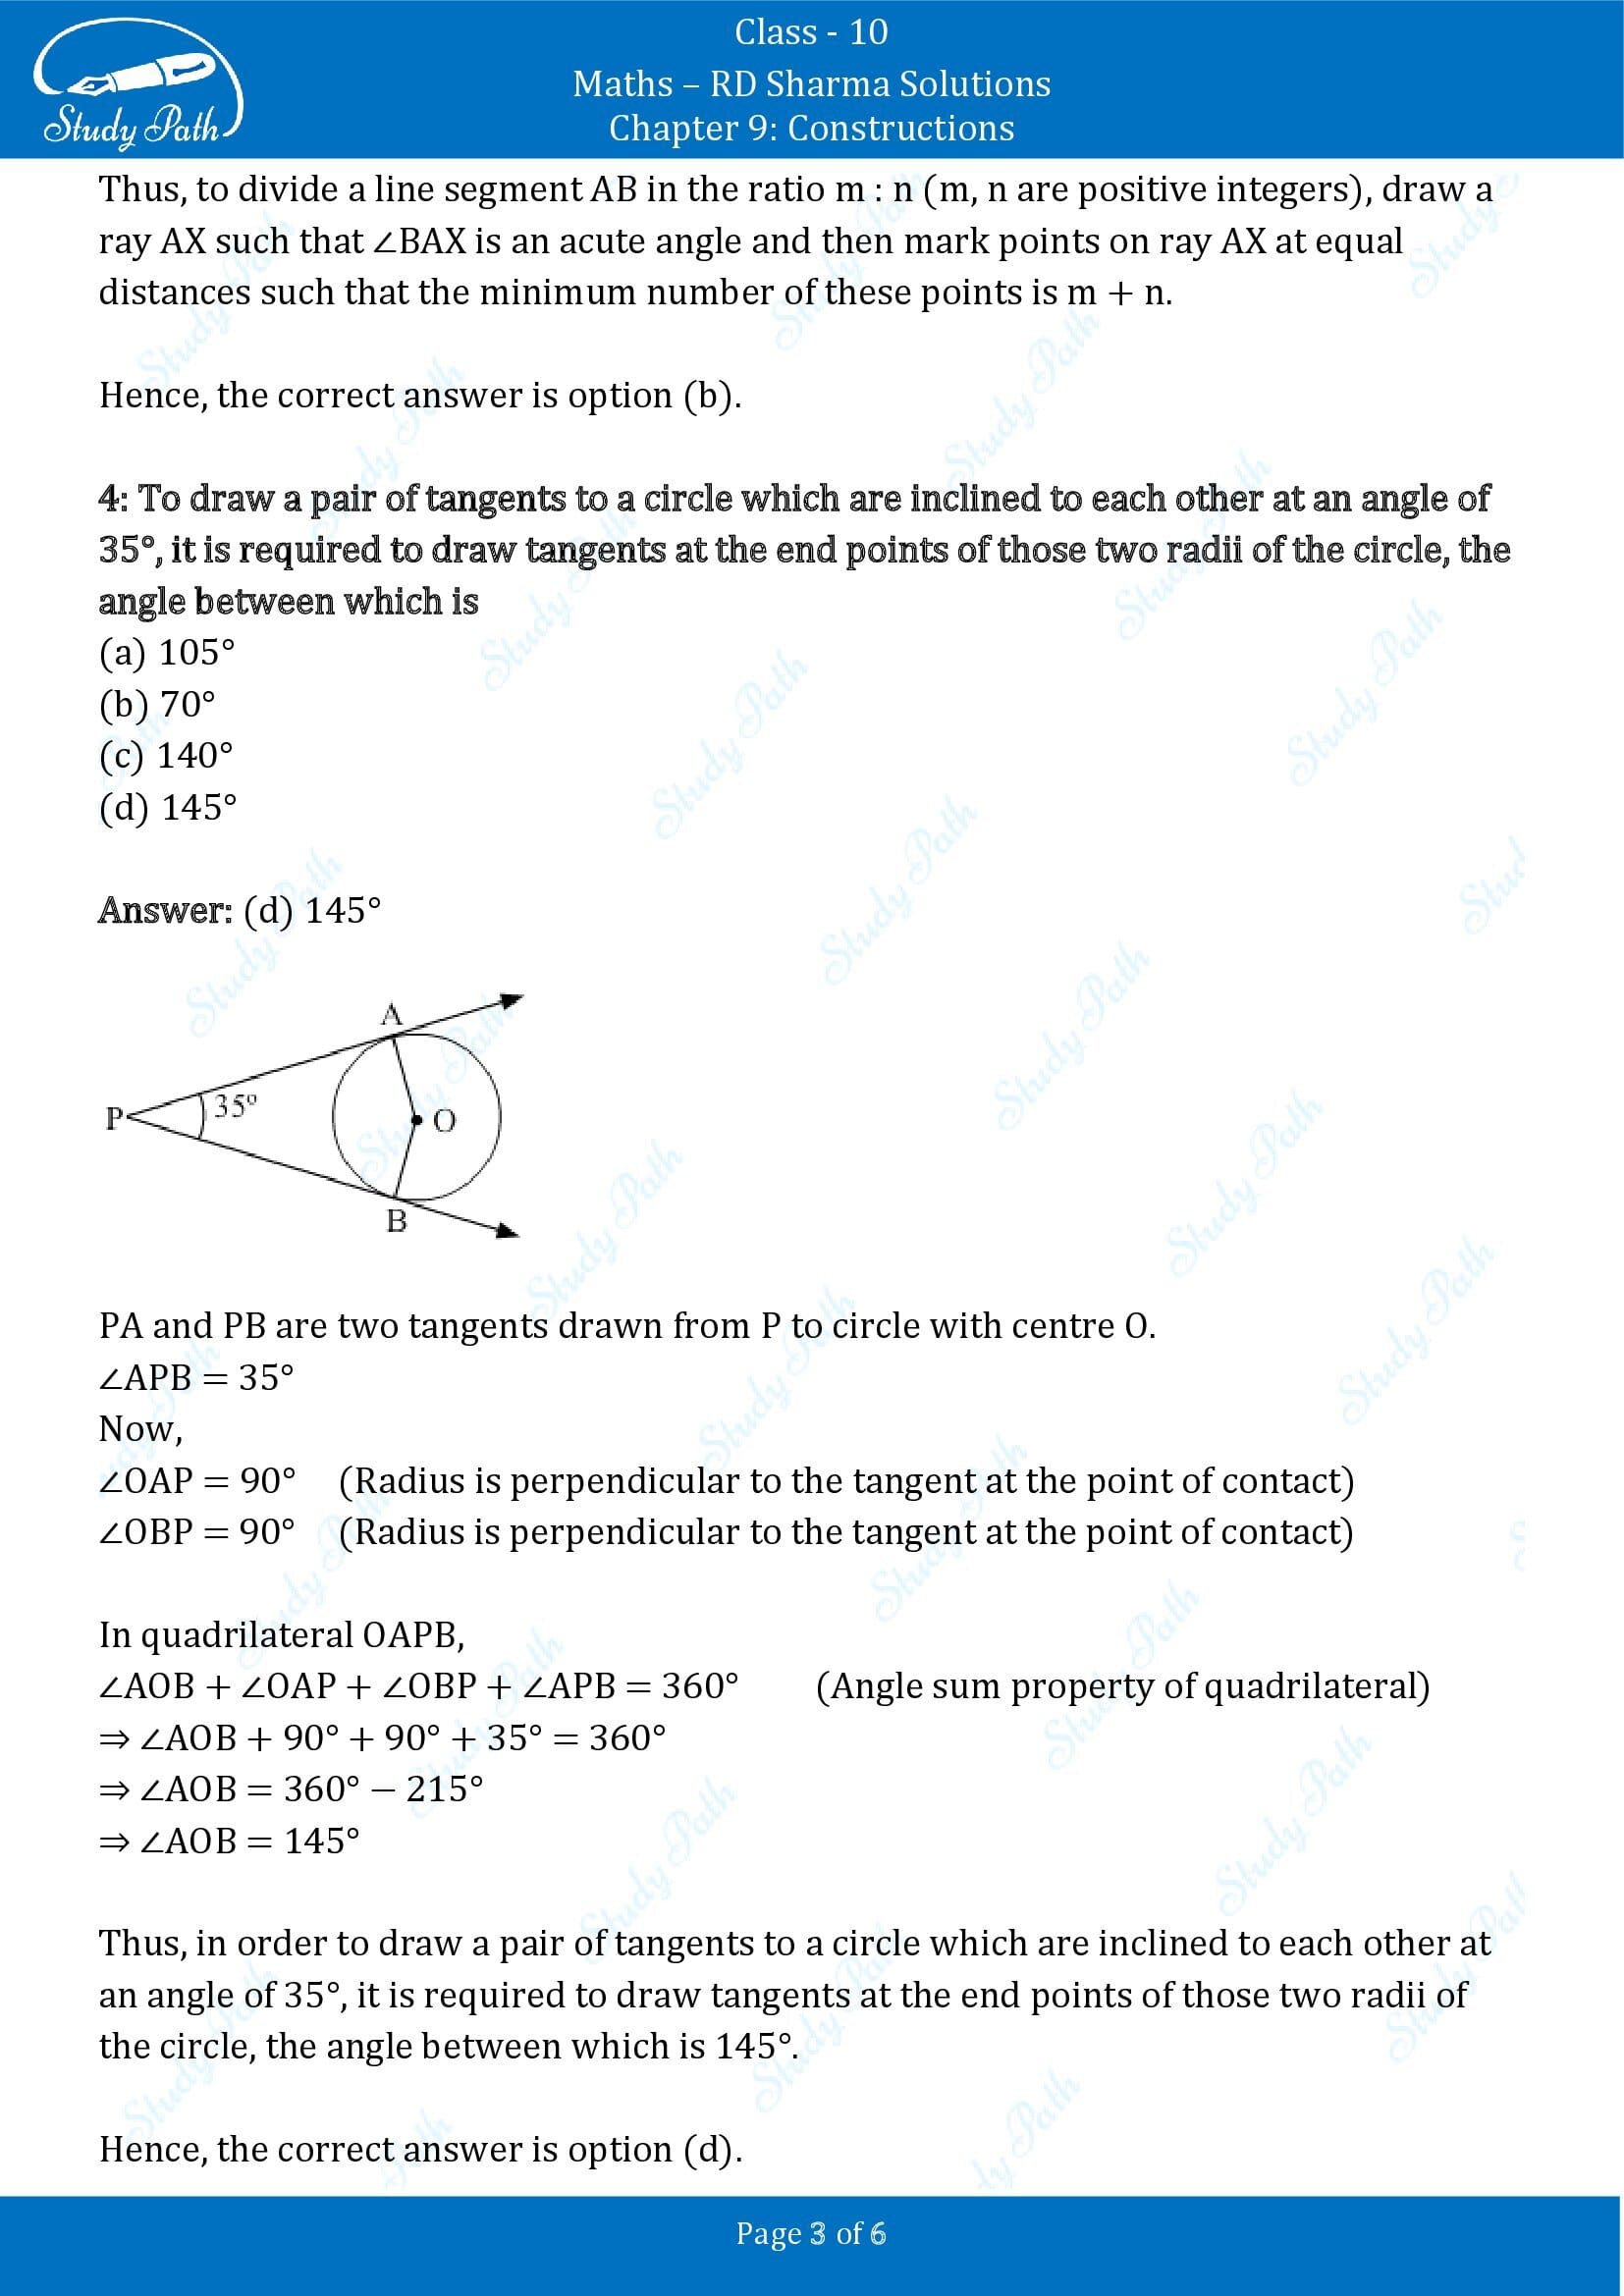 RD Sharma Solutions Class 10 Chapter 9 Constructions Multiple Choice Question MCQs 00003